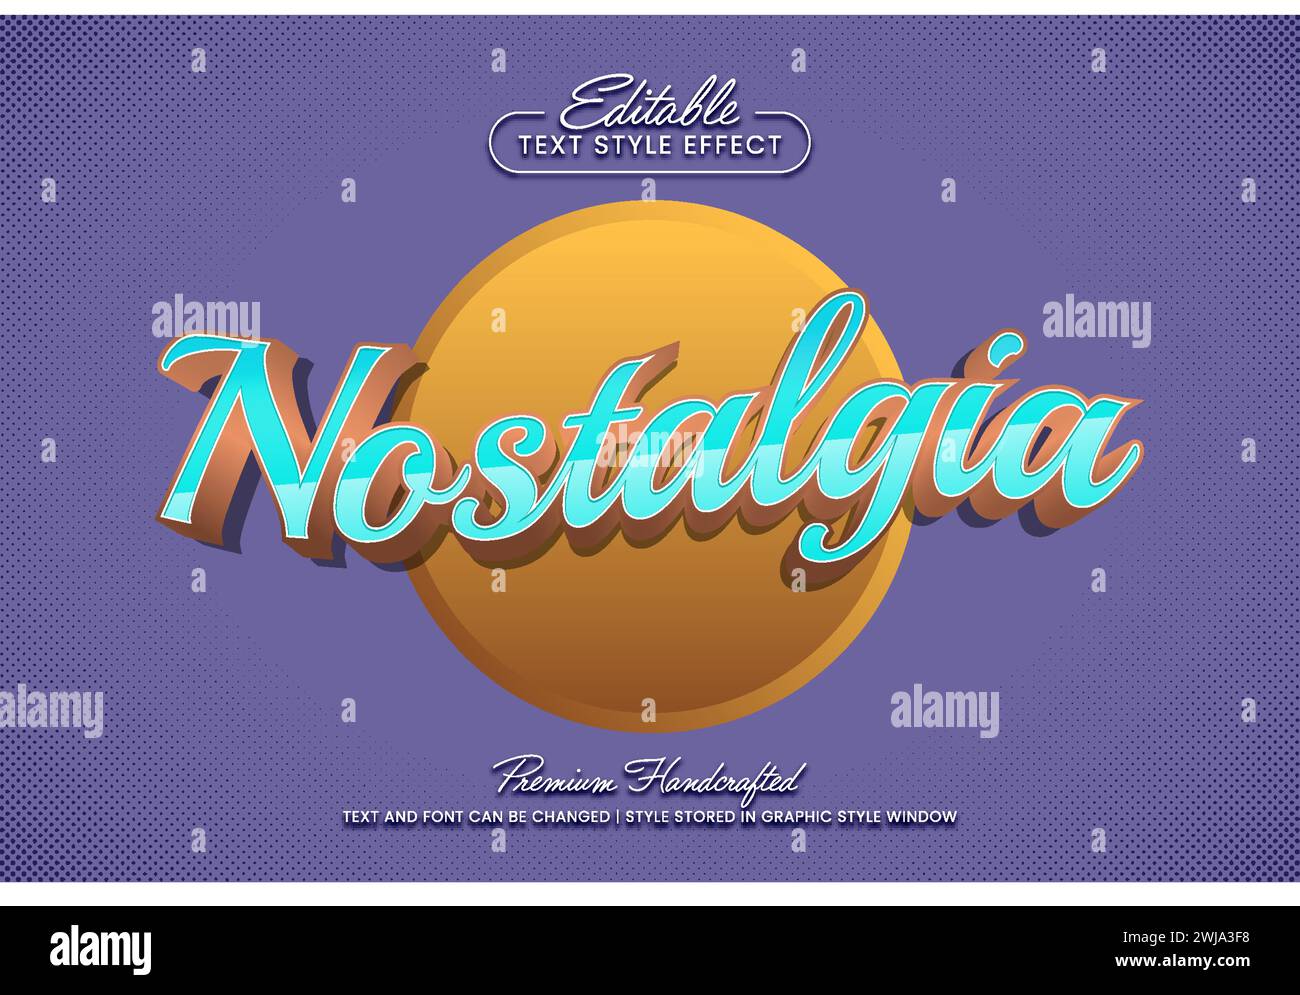 Nostalgia 3D vector text effect graphic style. Editable vector headline and title template. Stock Vector